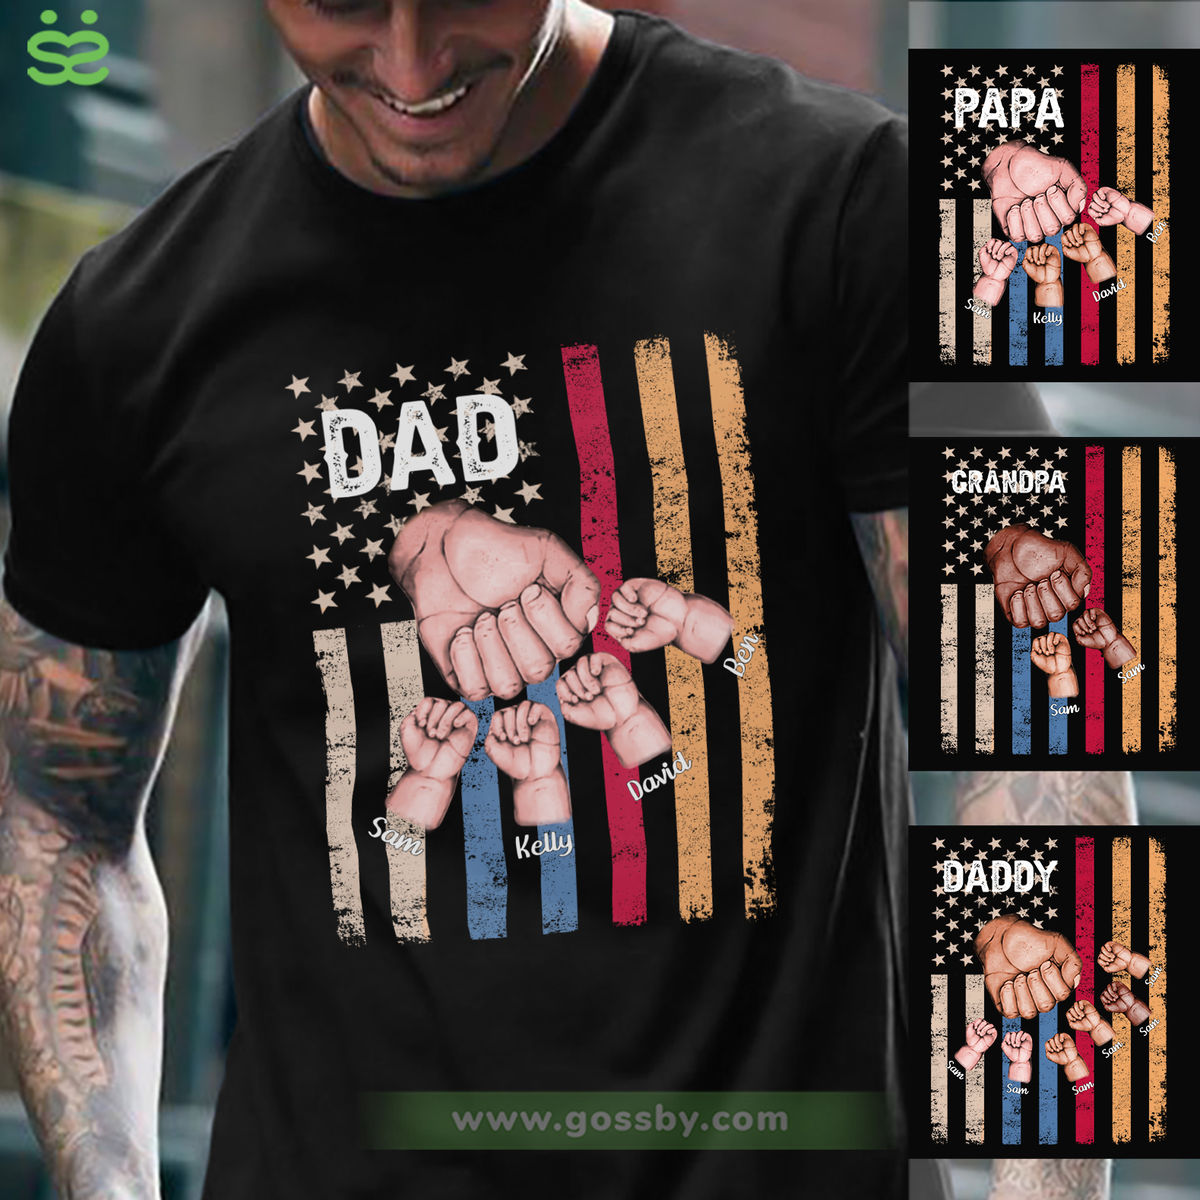 DAD - Father's Day Gift, Birthday Gifts For Dad, Grandpa, Gifts For Dad, Grandpa